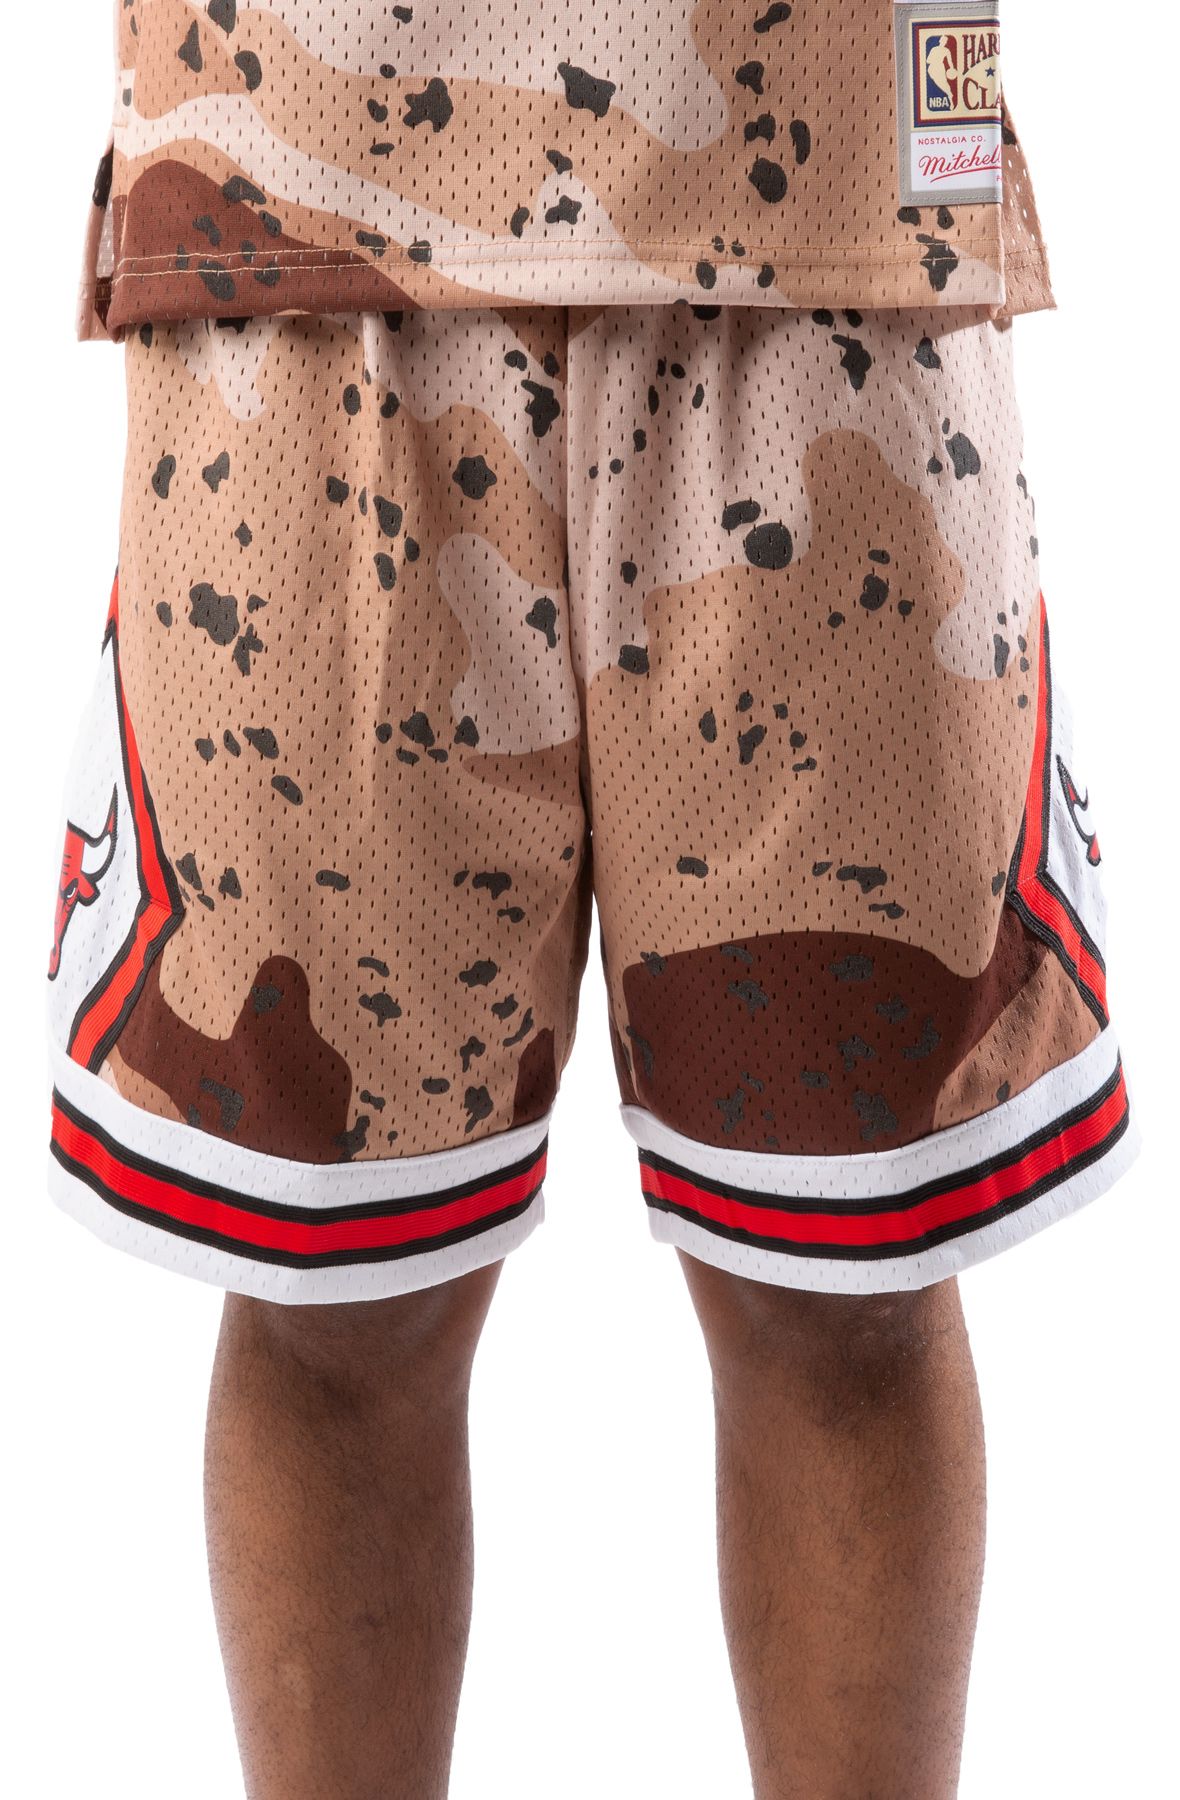 chicago bulls shorts outfit｜TikTok Search